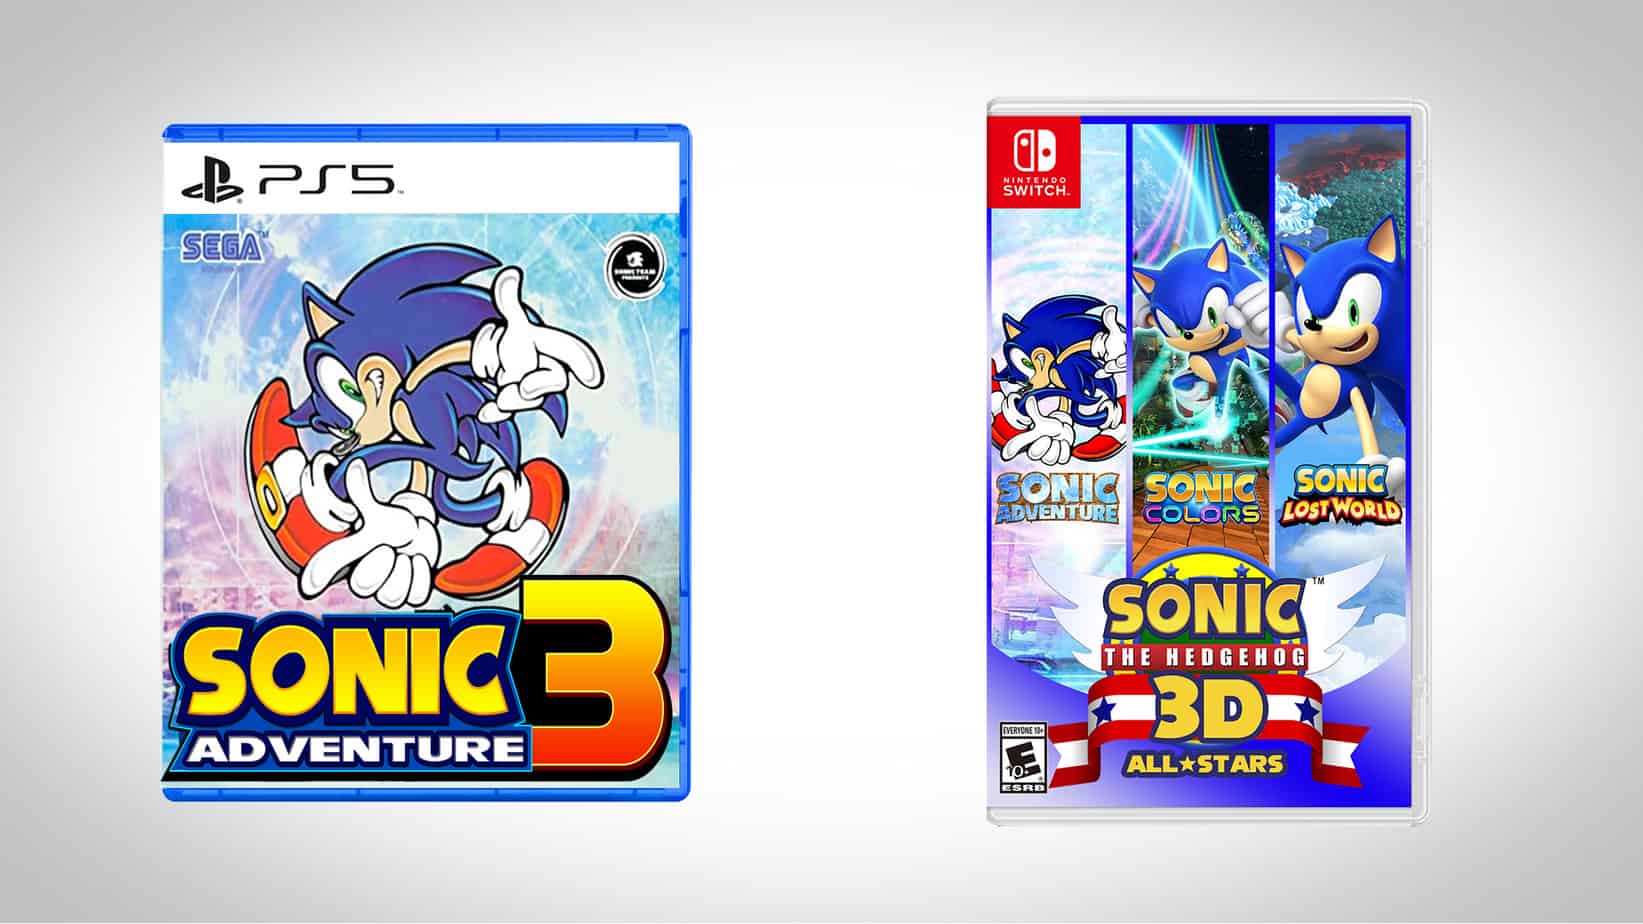 Sega delisting classic Sonic games in May ahead of Sonic Origins release -  Polygon